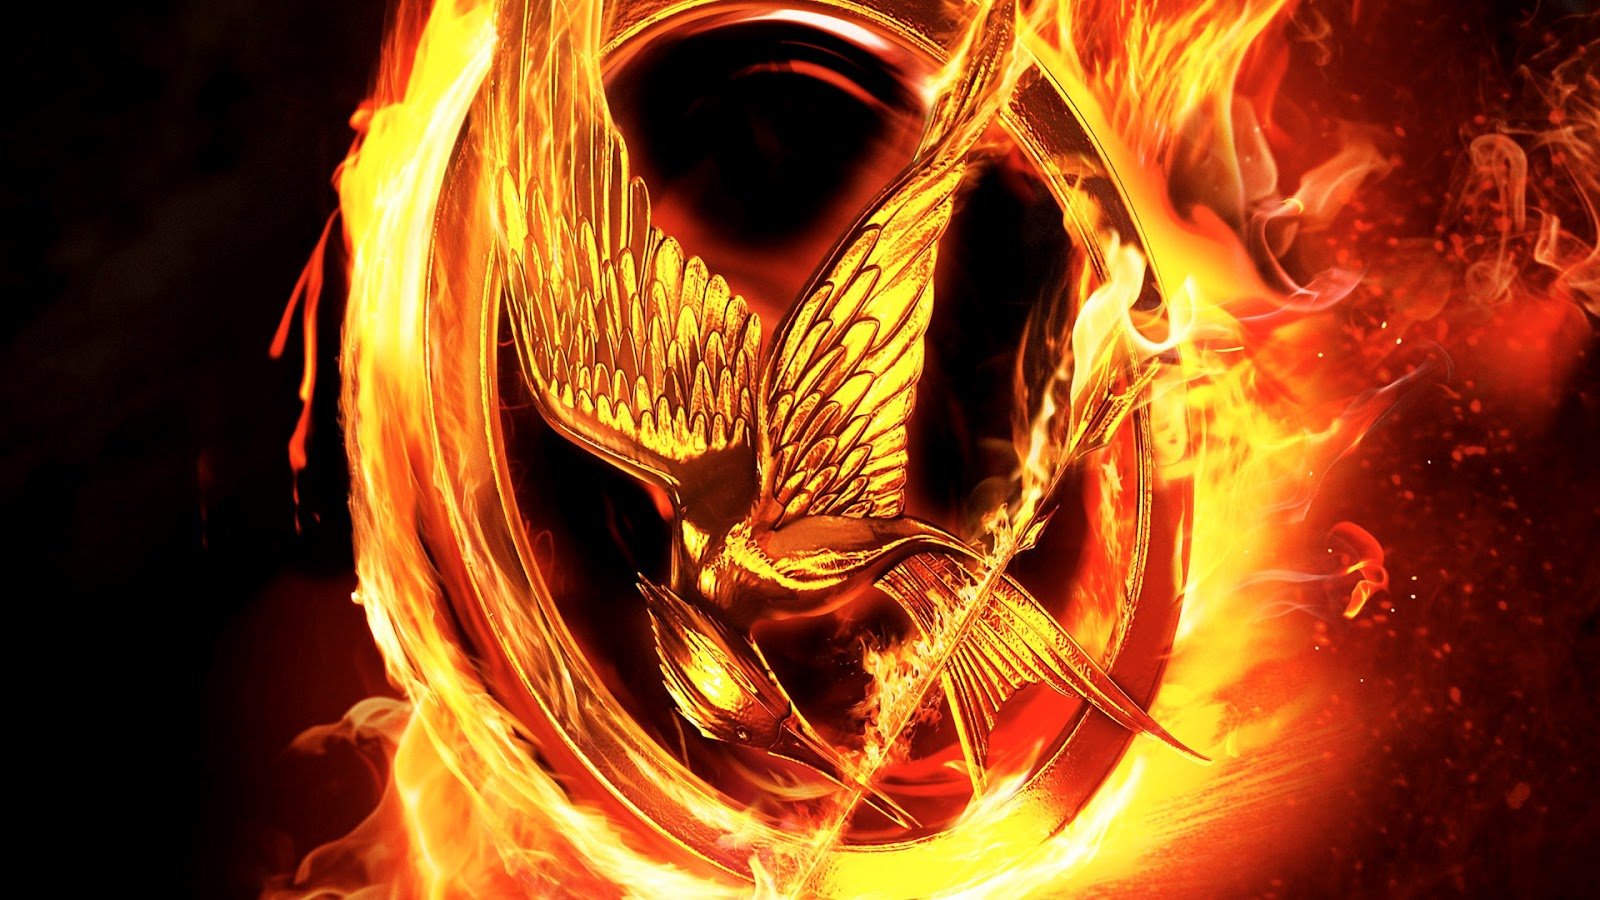 The Hunger Games Wallpaper Free Games PC Downloads